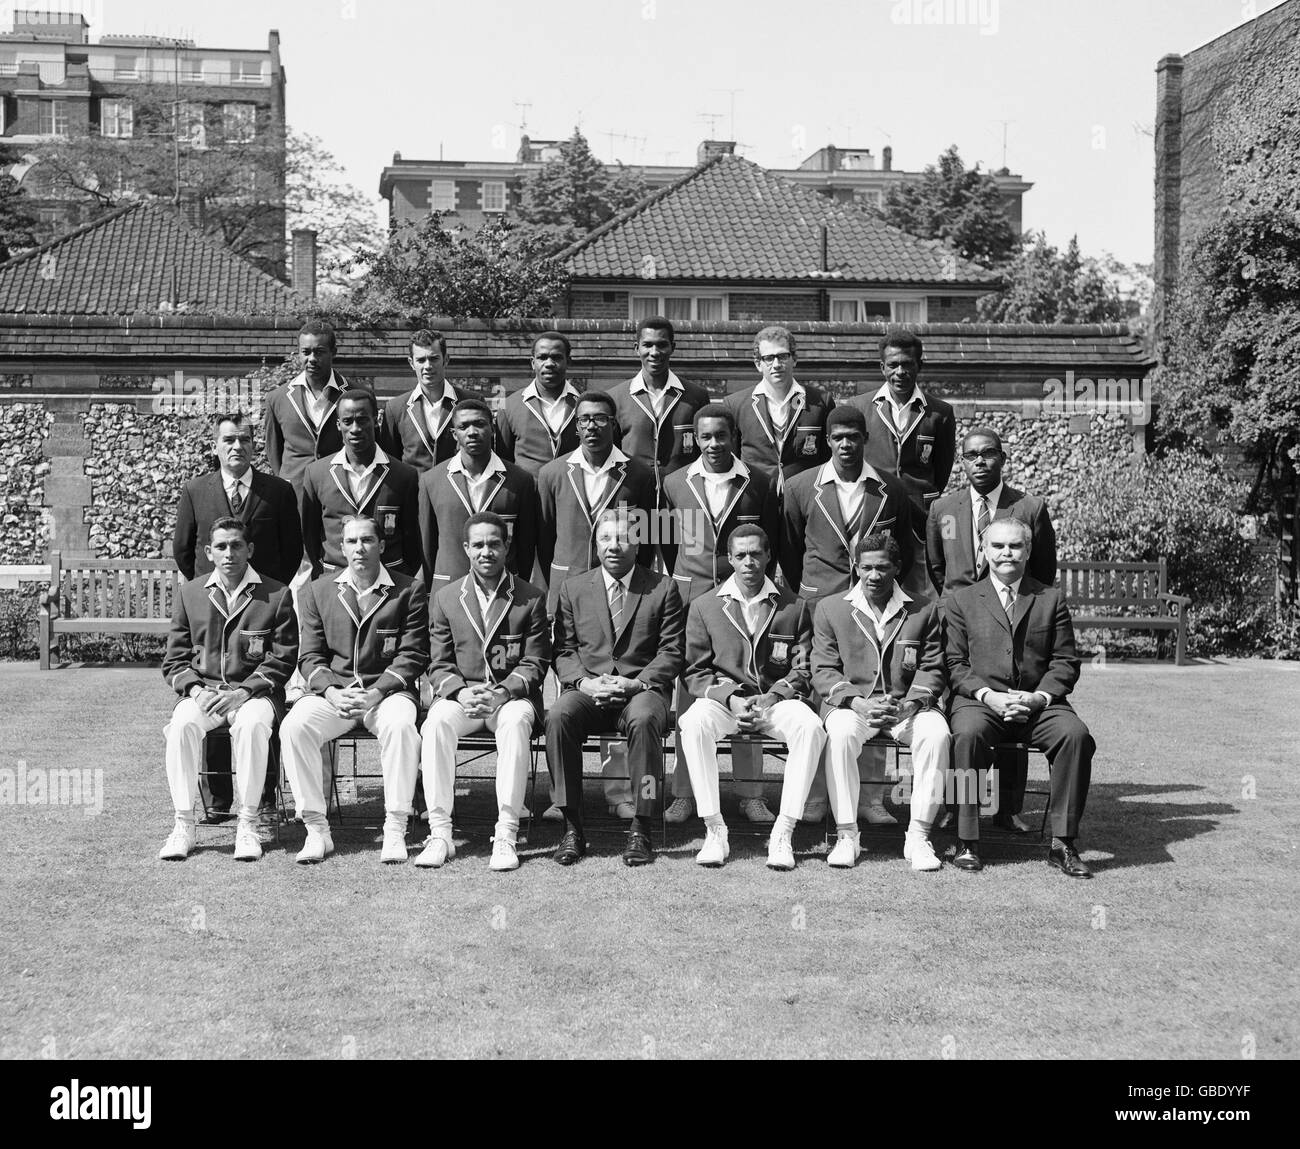 West Indies Team Group. Back row, from L to R: Maurice Foster, Charlie Davis, John Shepherd, Mike Findlay, Steve Camacho, Roy Fredericks. Centre Row, L to R: M Hoyes (Physiotherapist - unknown first name), Vanburn Holder, Pascal Roberts, Clive Lloyd, Grayson Shillingford, Philibert Blair, N Walker (Asst manager - unknown first name). Front Row, L to R: Joey Carew, Jackie Hendriks, Gary Sobers (Captain), Clyde Walcott, Lance Gibbs (Vice Capt), Basil Butcher, P Short (Treasurer - first name unknown) Stock Photo